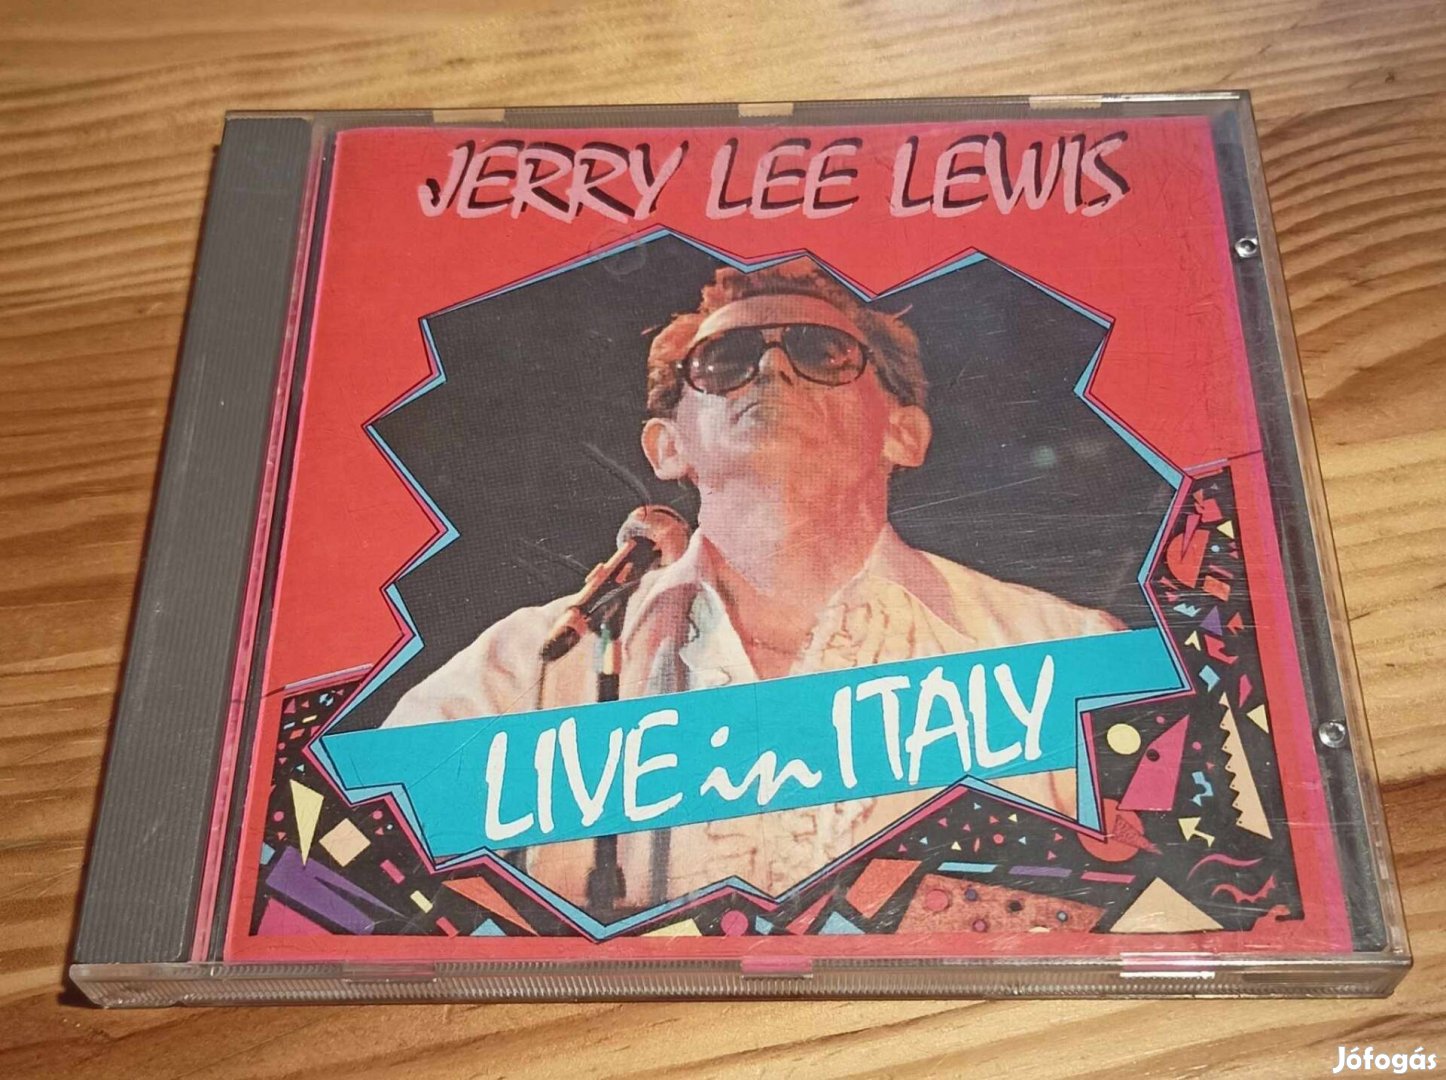 Jerry Lee Lewis - Live in Italy CD